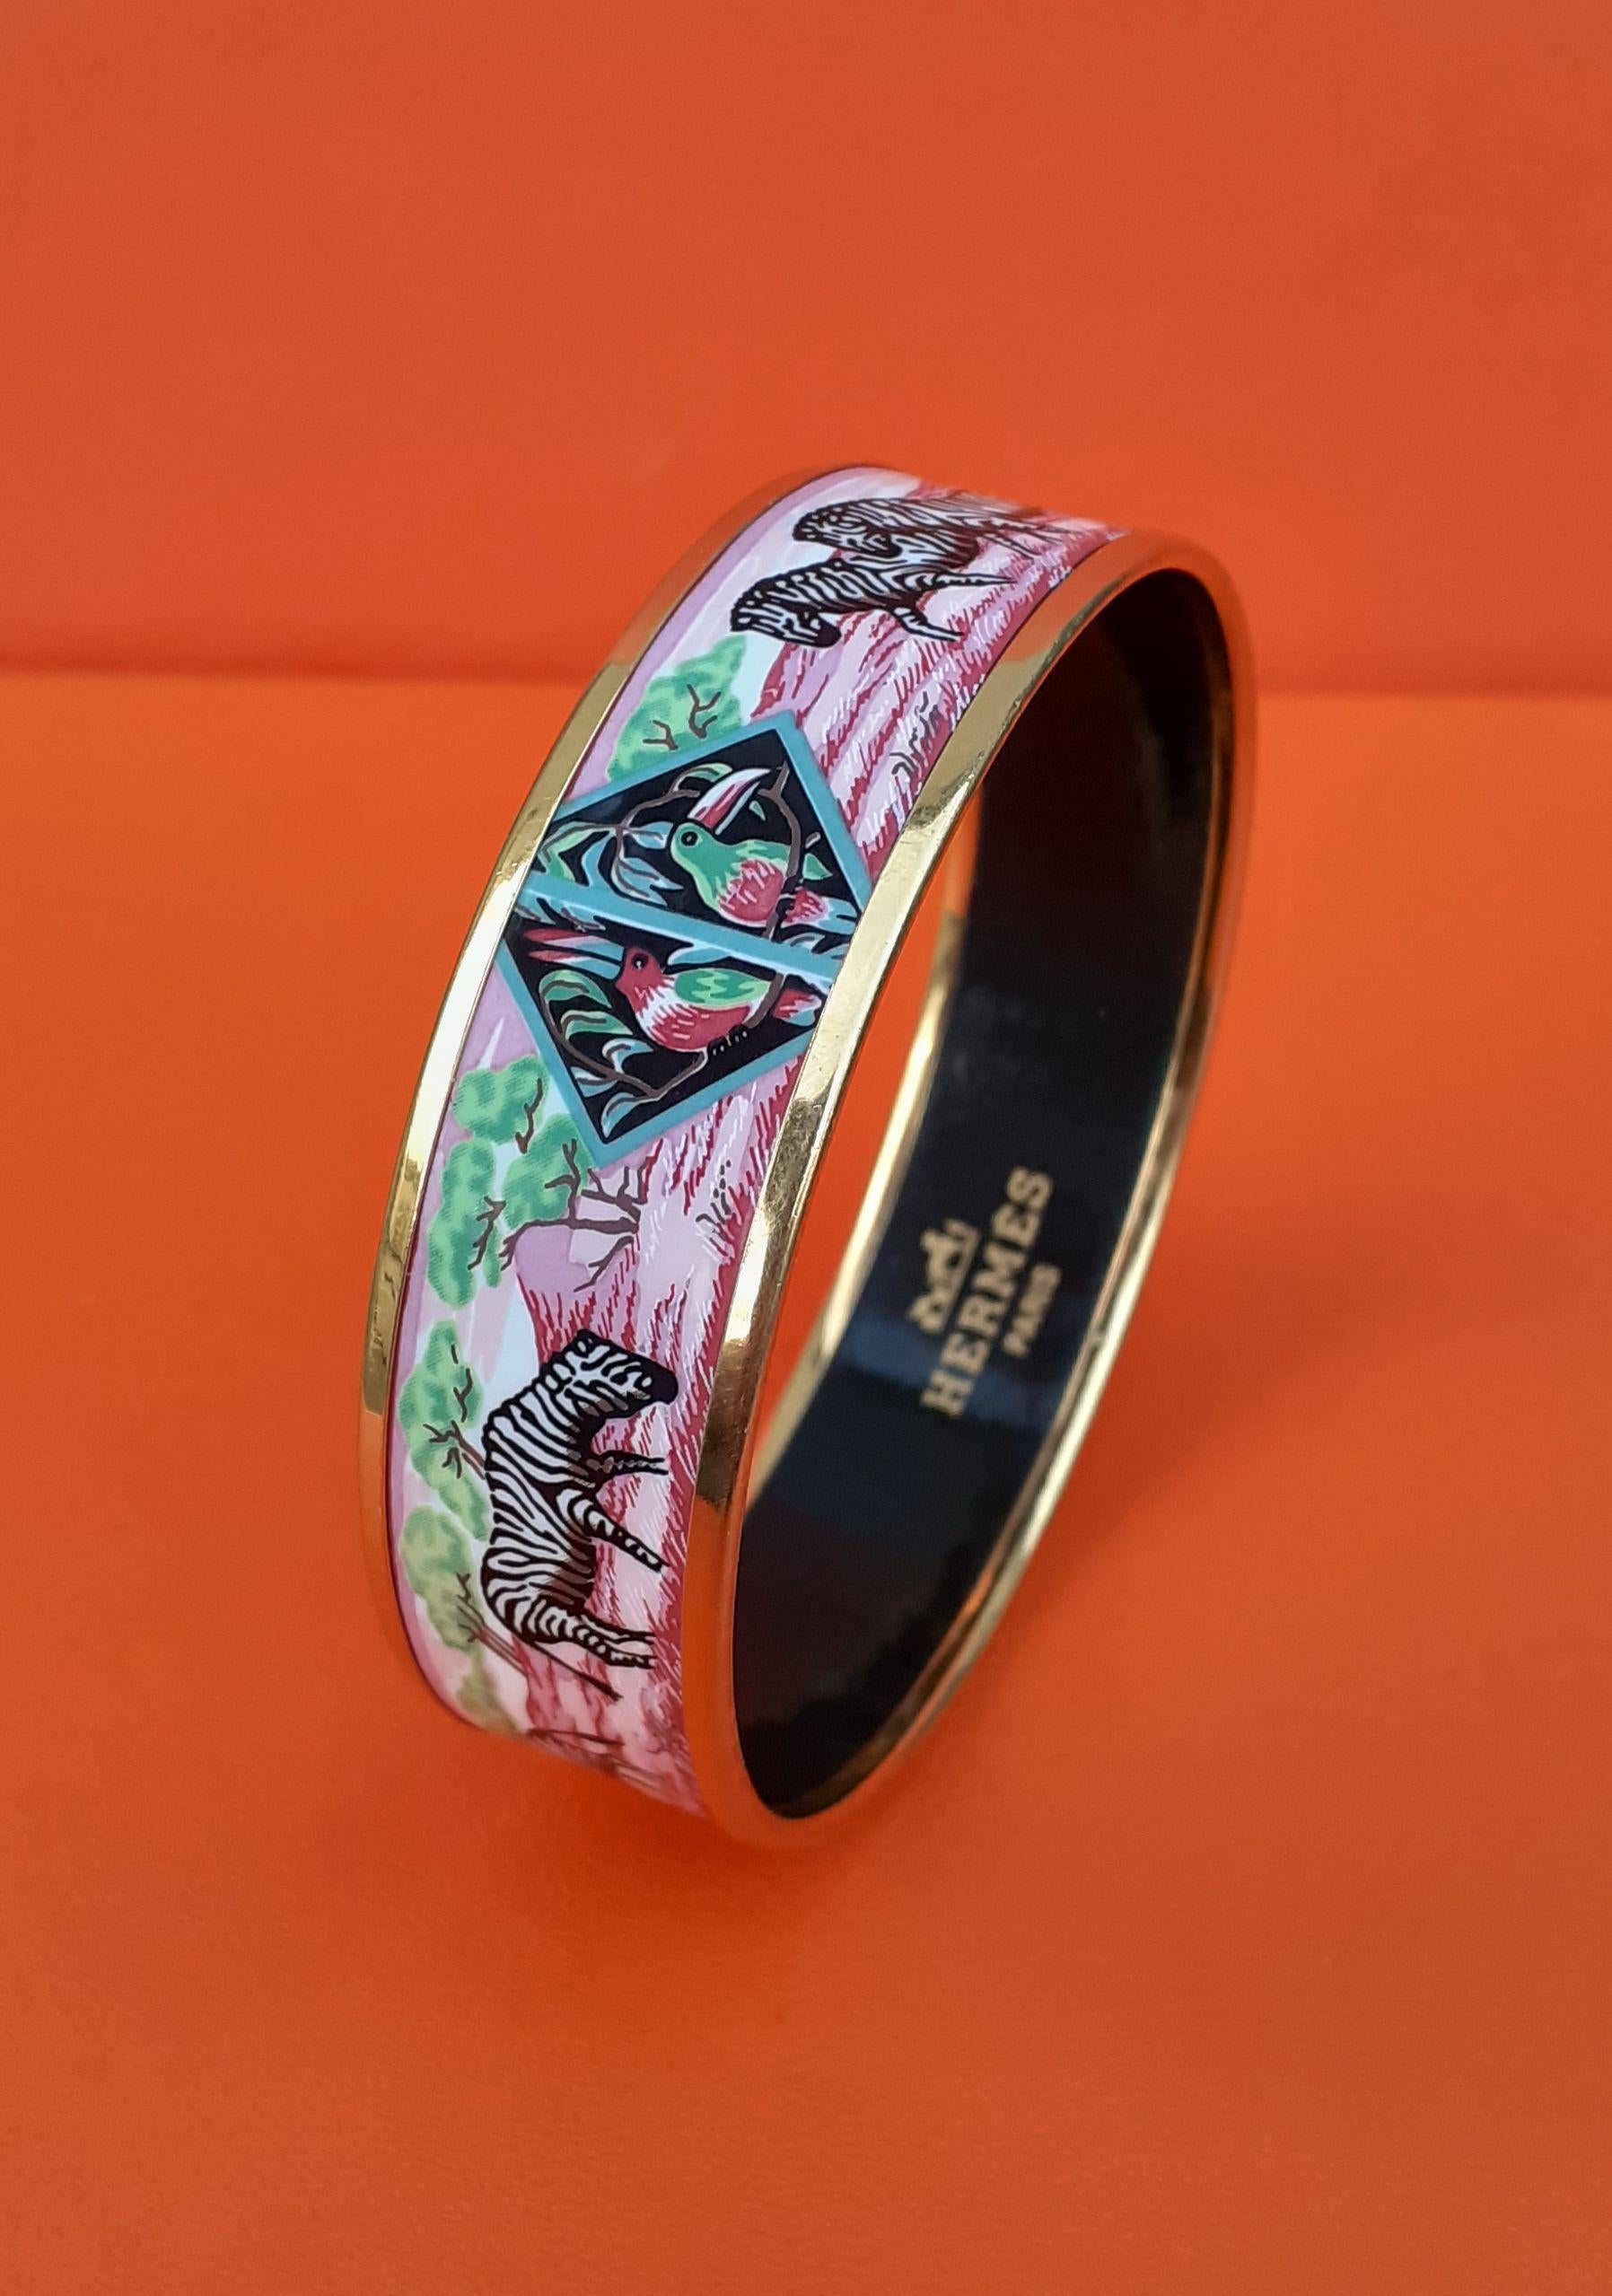 Super Rare and Beautiful Authentic Hermès Bracelet

Pattern: Zebras and Toucans

From the scarf called 